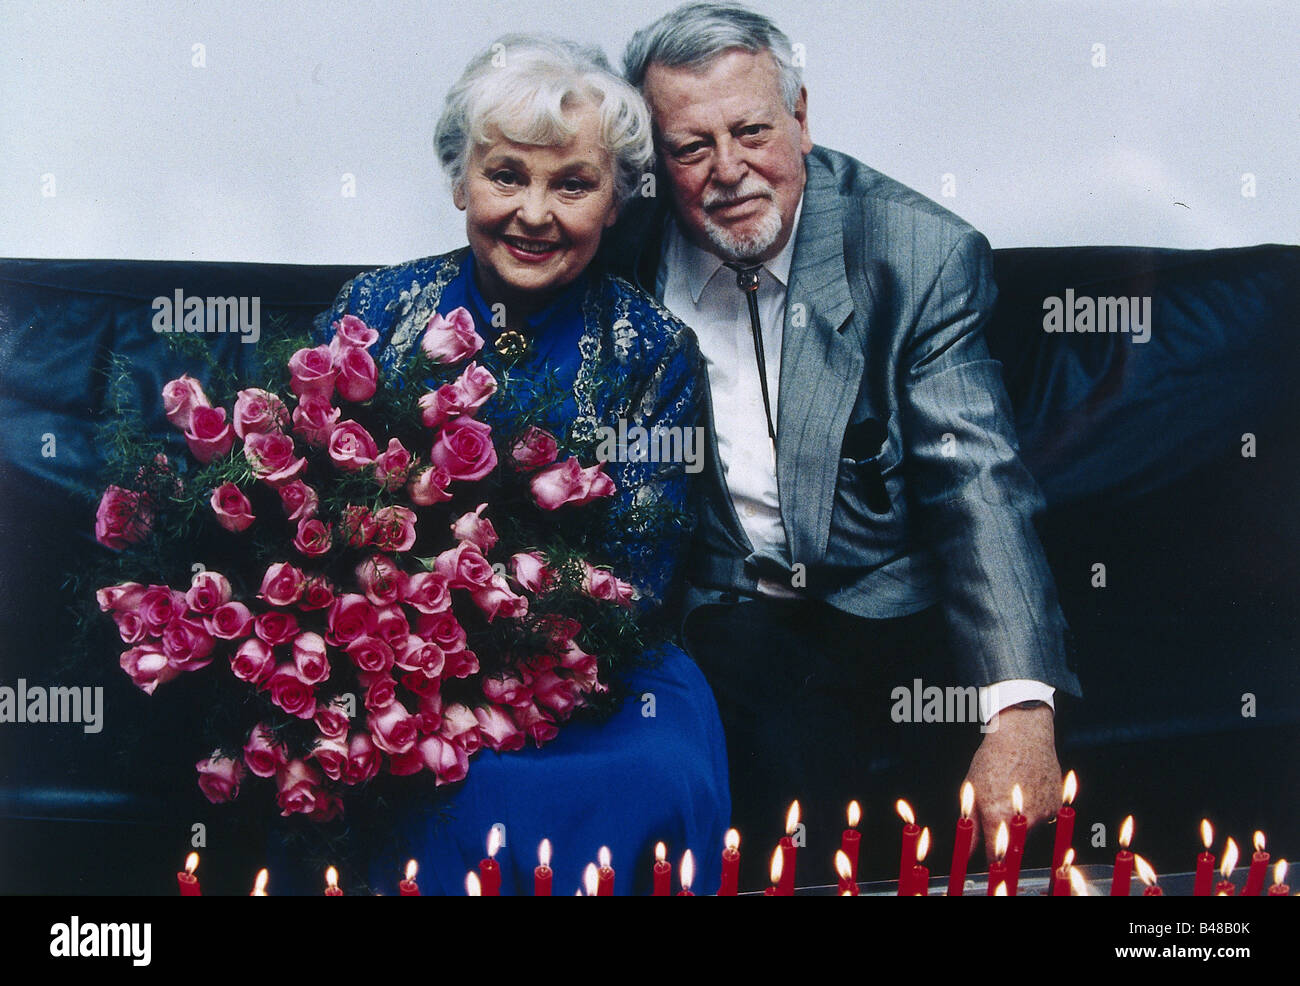 Löbel, Bruni, 20.12.1920 - 27.09.2006, German actress,  with husband, Holger Hagen, at 75th birthday party, 19.12.1995, Stock Photo